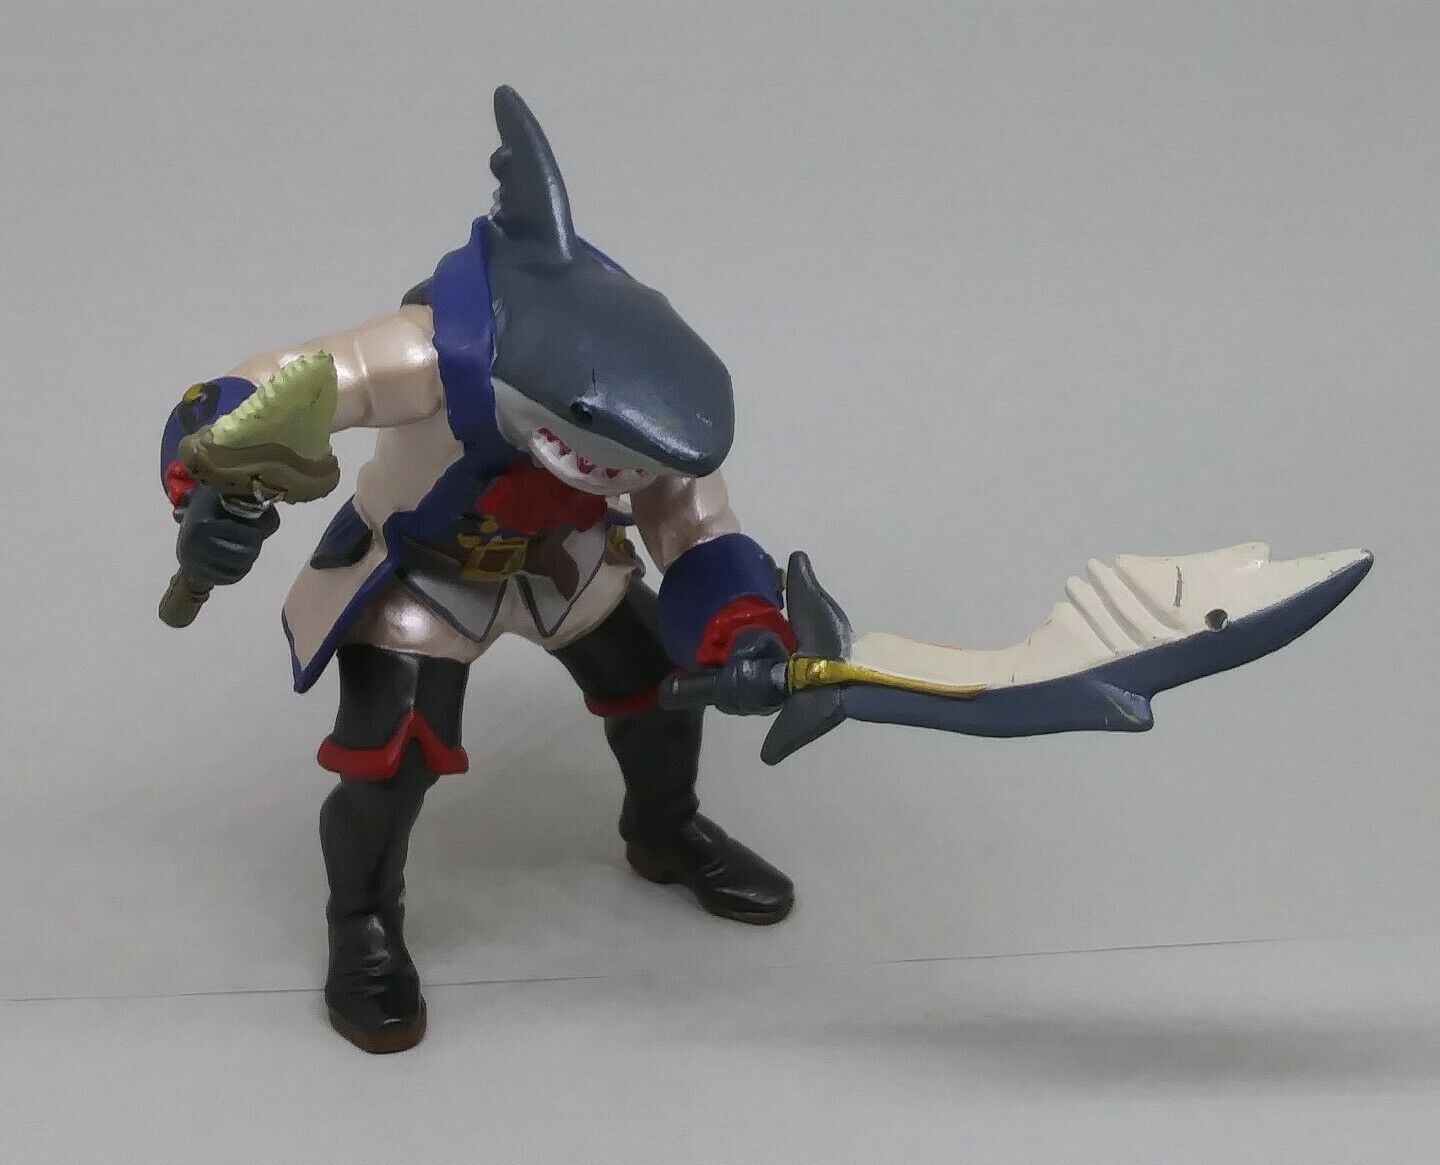 PAPO Shark Mutant Pirate Action Figure - Mythical Monster 2010